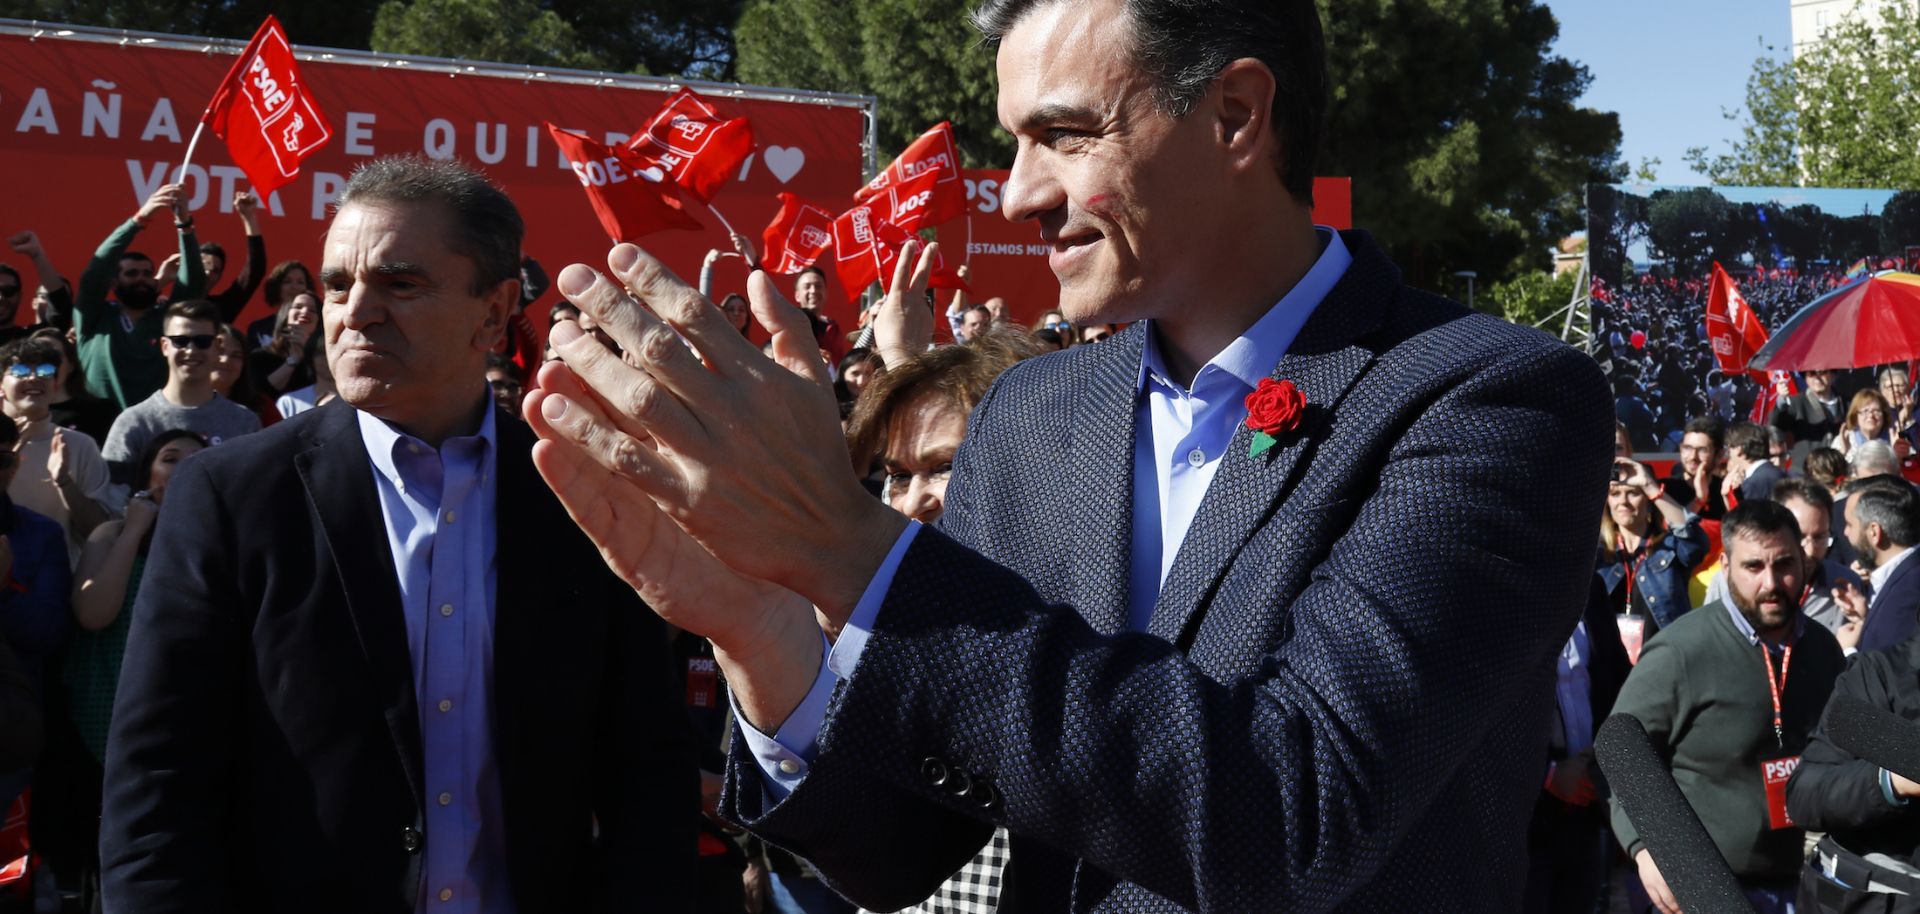 Pedro Sanchez, leader of the Spanish Socialist Workers' Party, attends a rally.